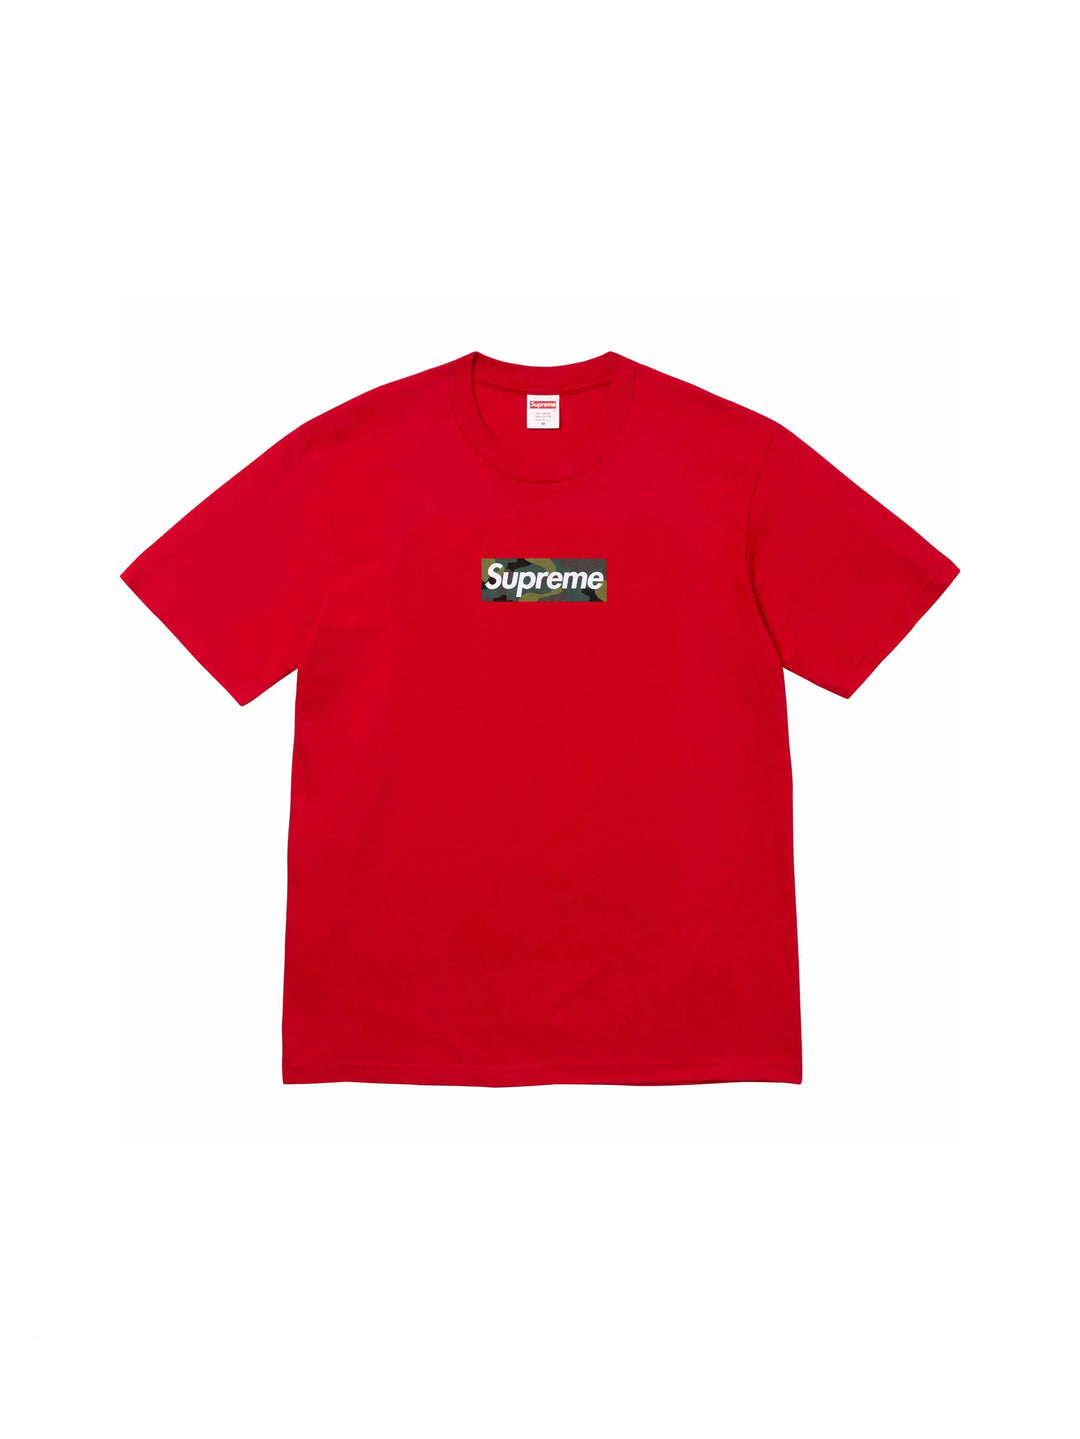 Supreme Box Logo Tee (FW23) Red in Auckland, New Zealand - Shop name